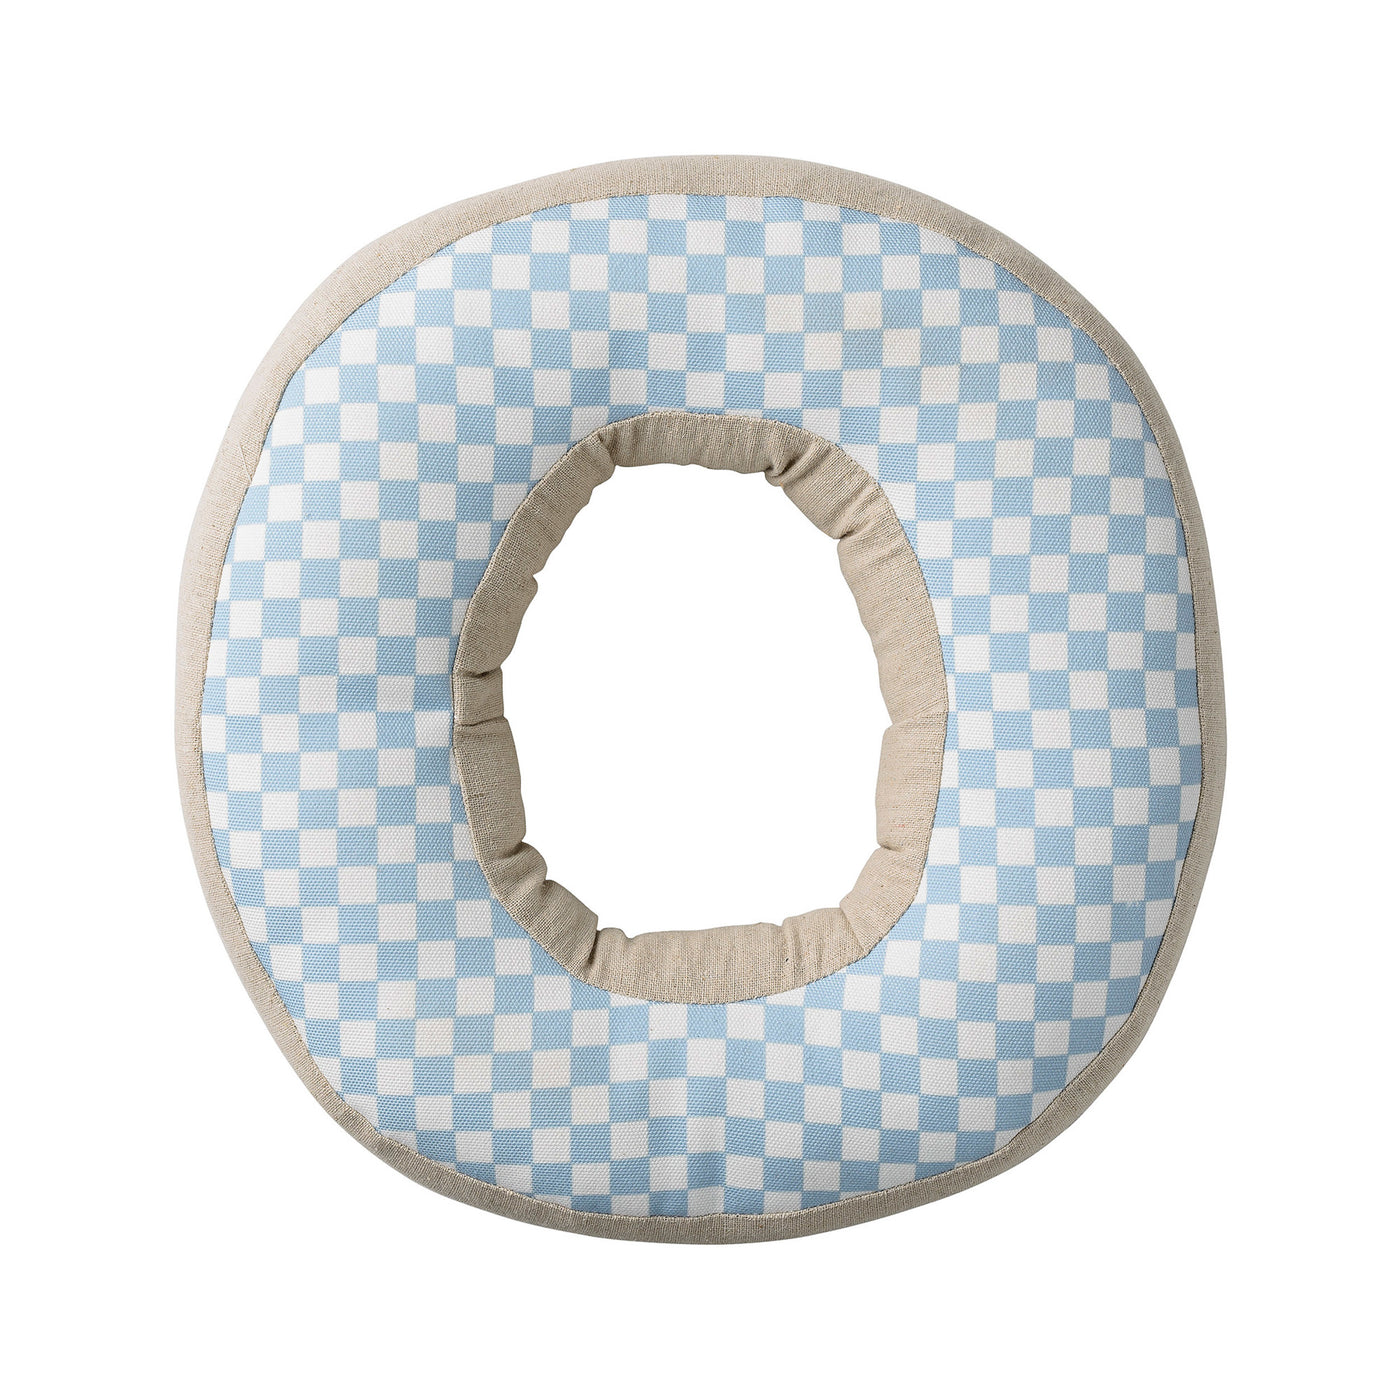 'O' Cotton Pillow with Pattern